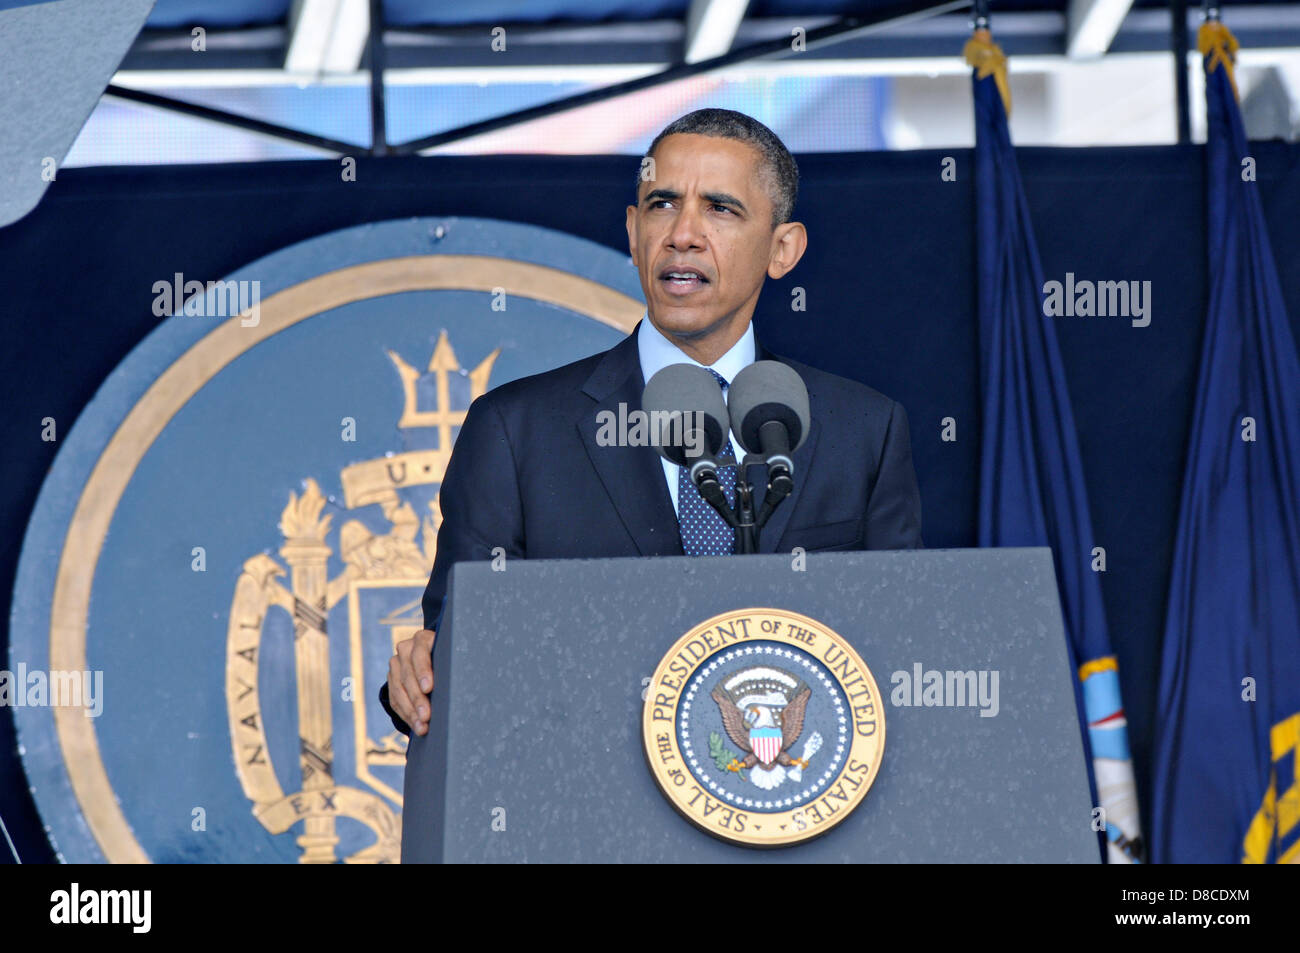 US President Barack Obama gives the commencement address at the US Naval Academy graduation and commissioning ceremony May 24, 2013 in Annapolis, MD. The academy graduated 841 ensigns and 206 Marine Corps 2nd lieutenants at Navy-Marine Corps Memorial Stadium. Stock Photo